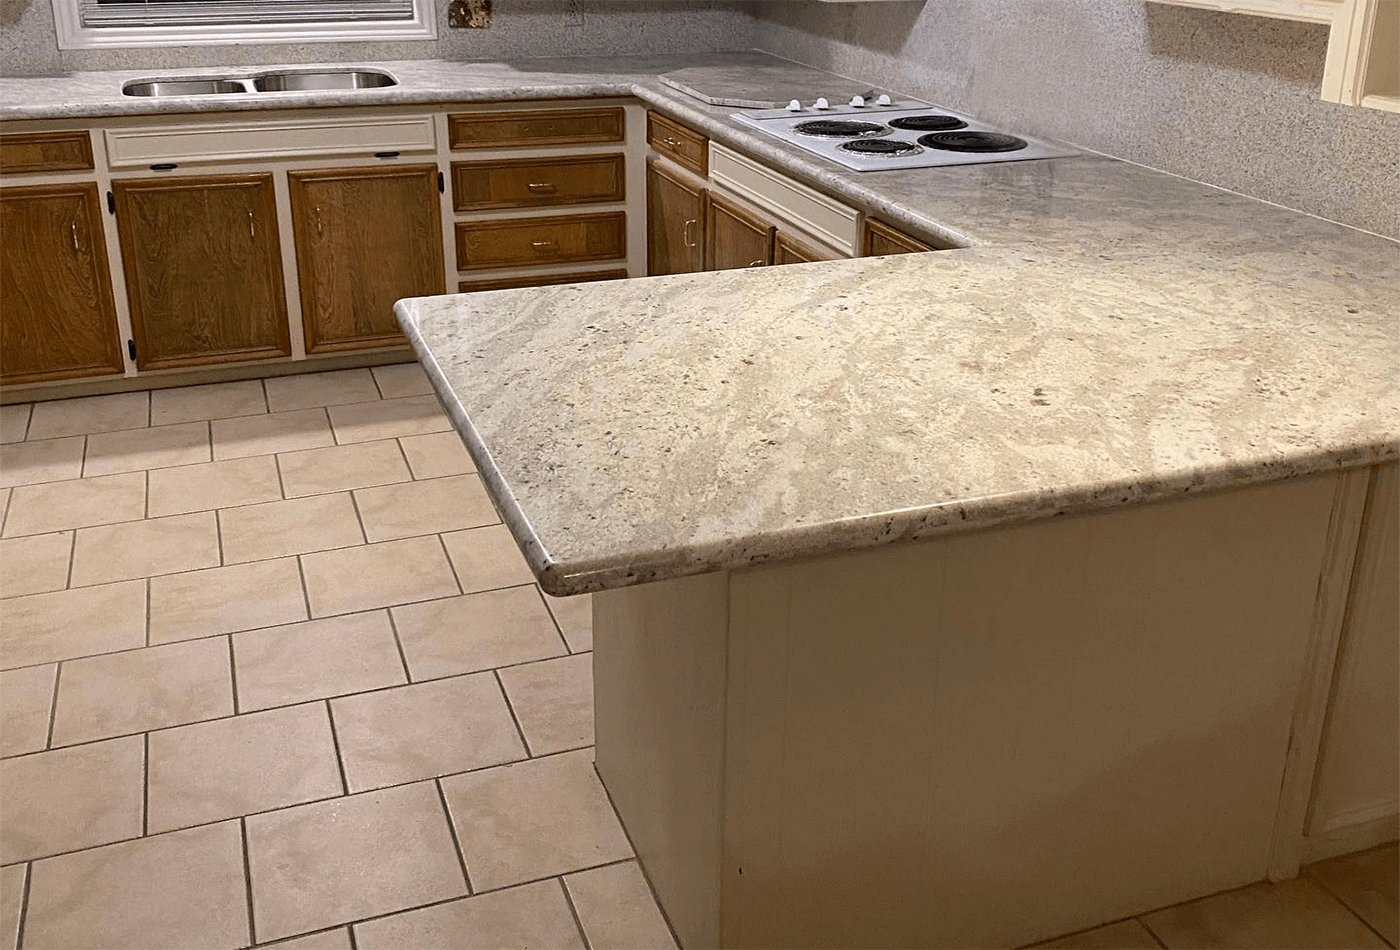 https://app.dropinblog.com/uploaded/blogs/34246798/files/Lets_Get_into_the_Detailed_View_of_the_White_Granite_Counter.png